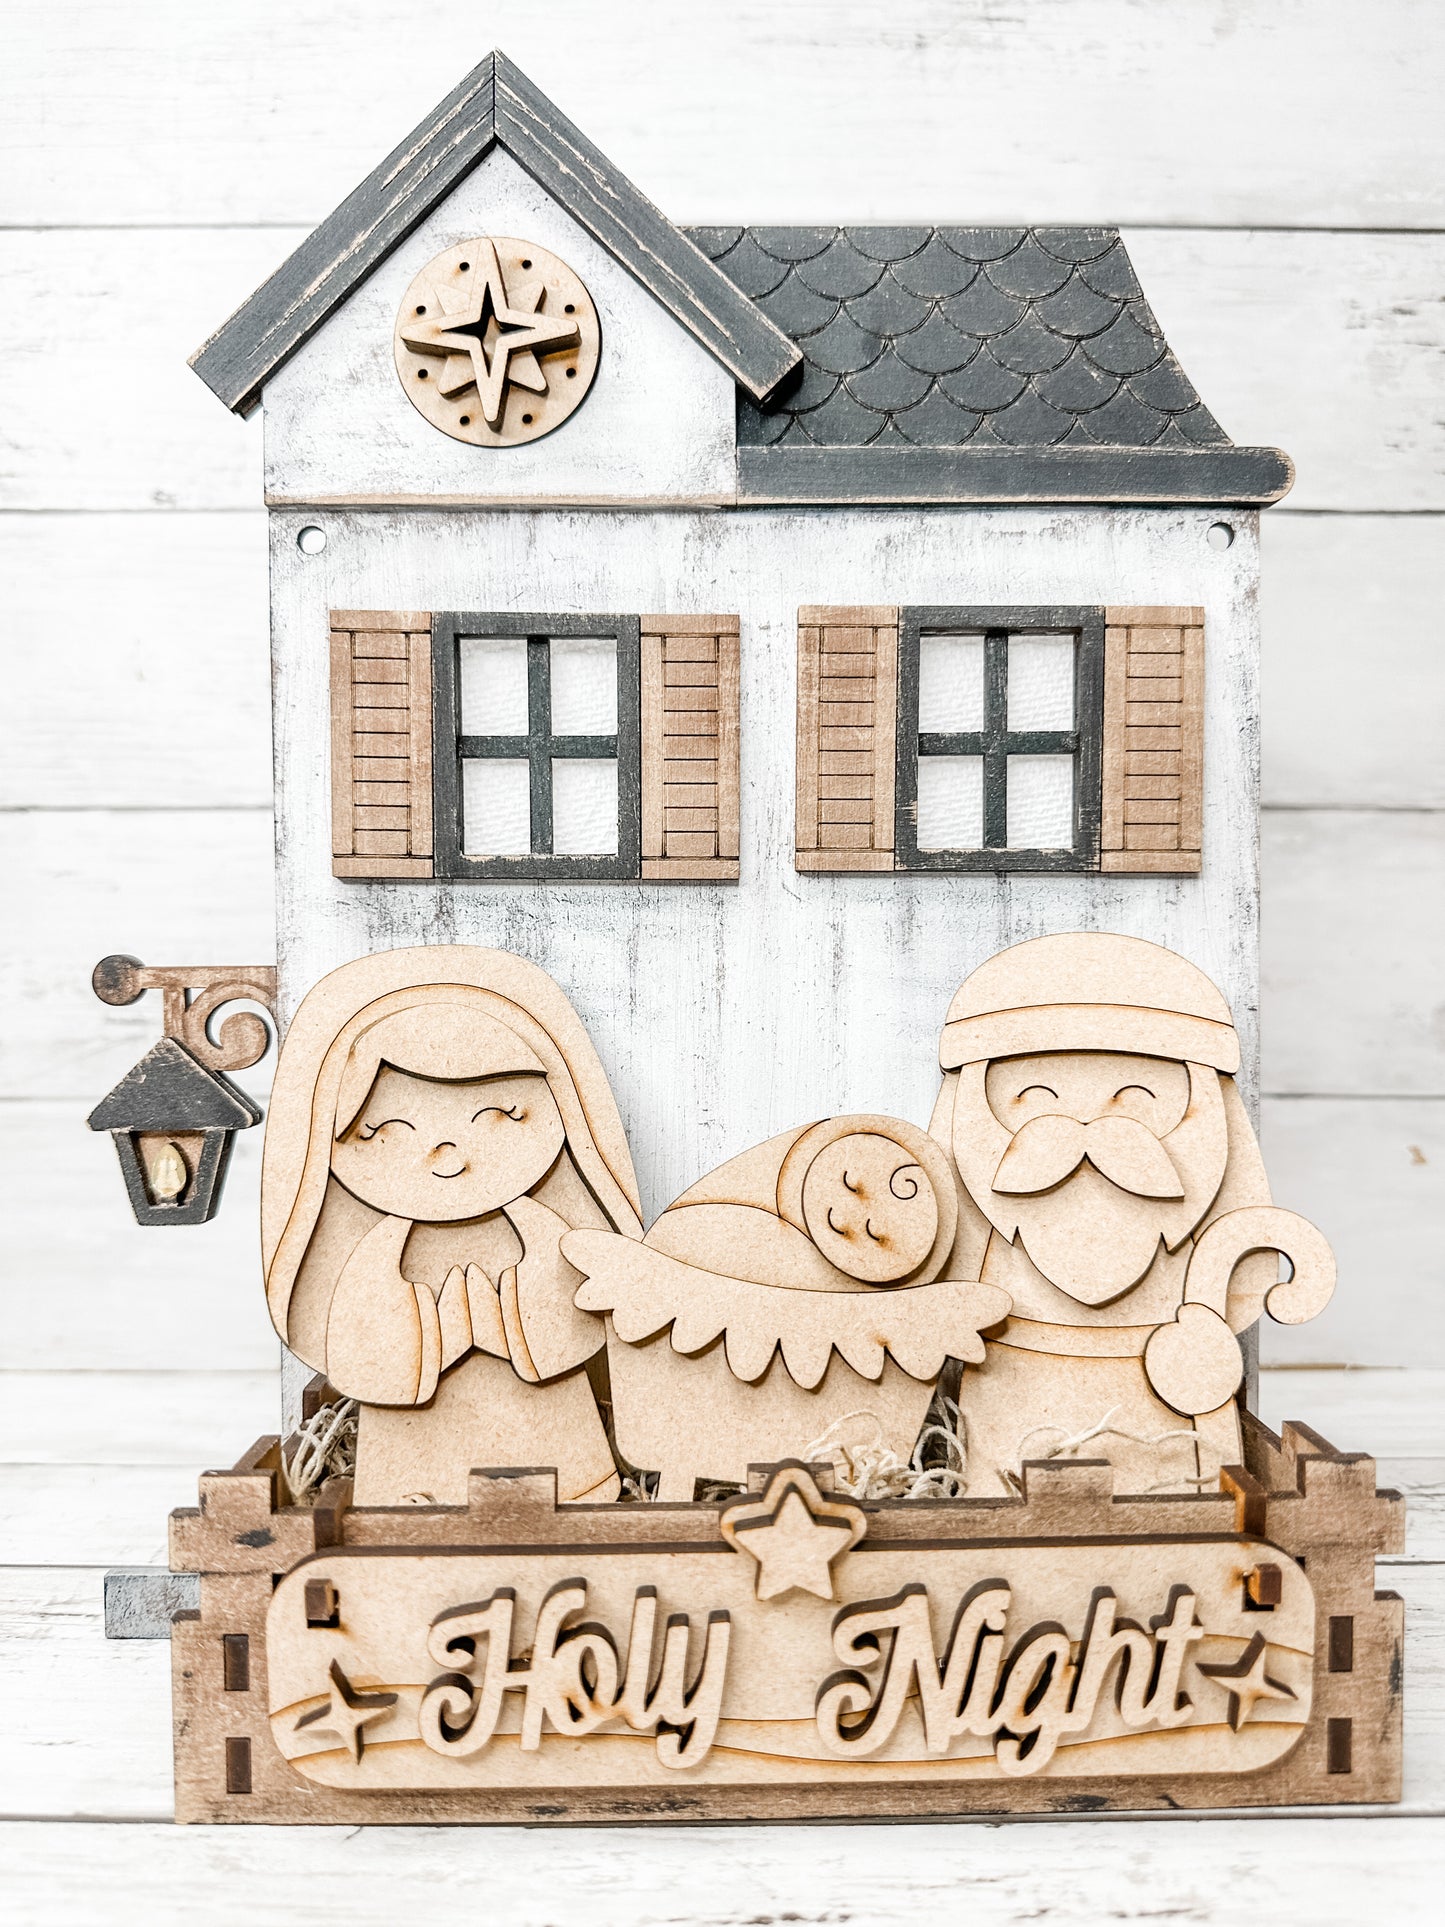 Holy Night Insert for Interchangeable bases DIY Craft Kit